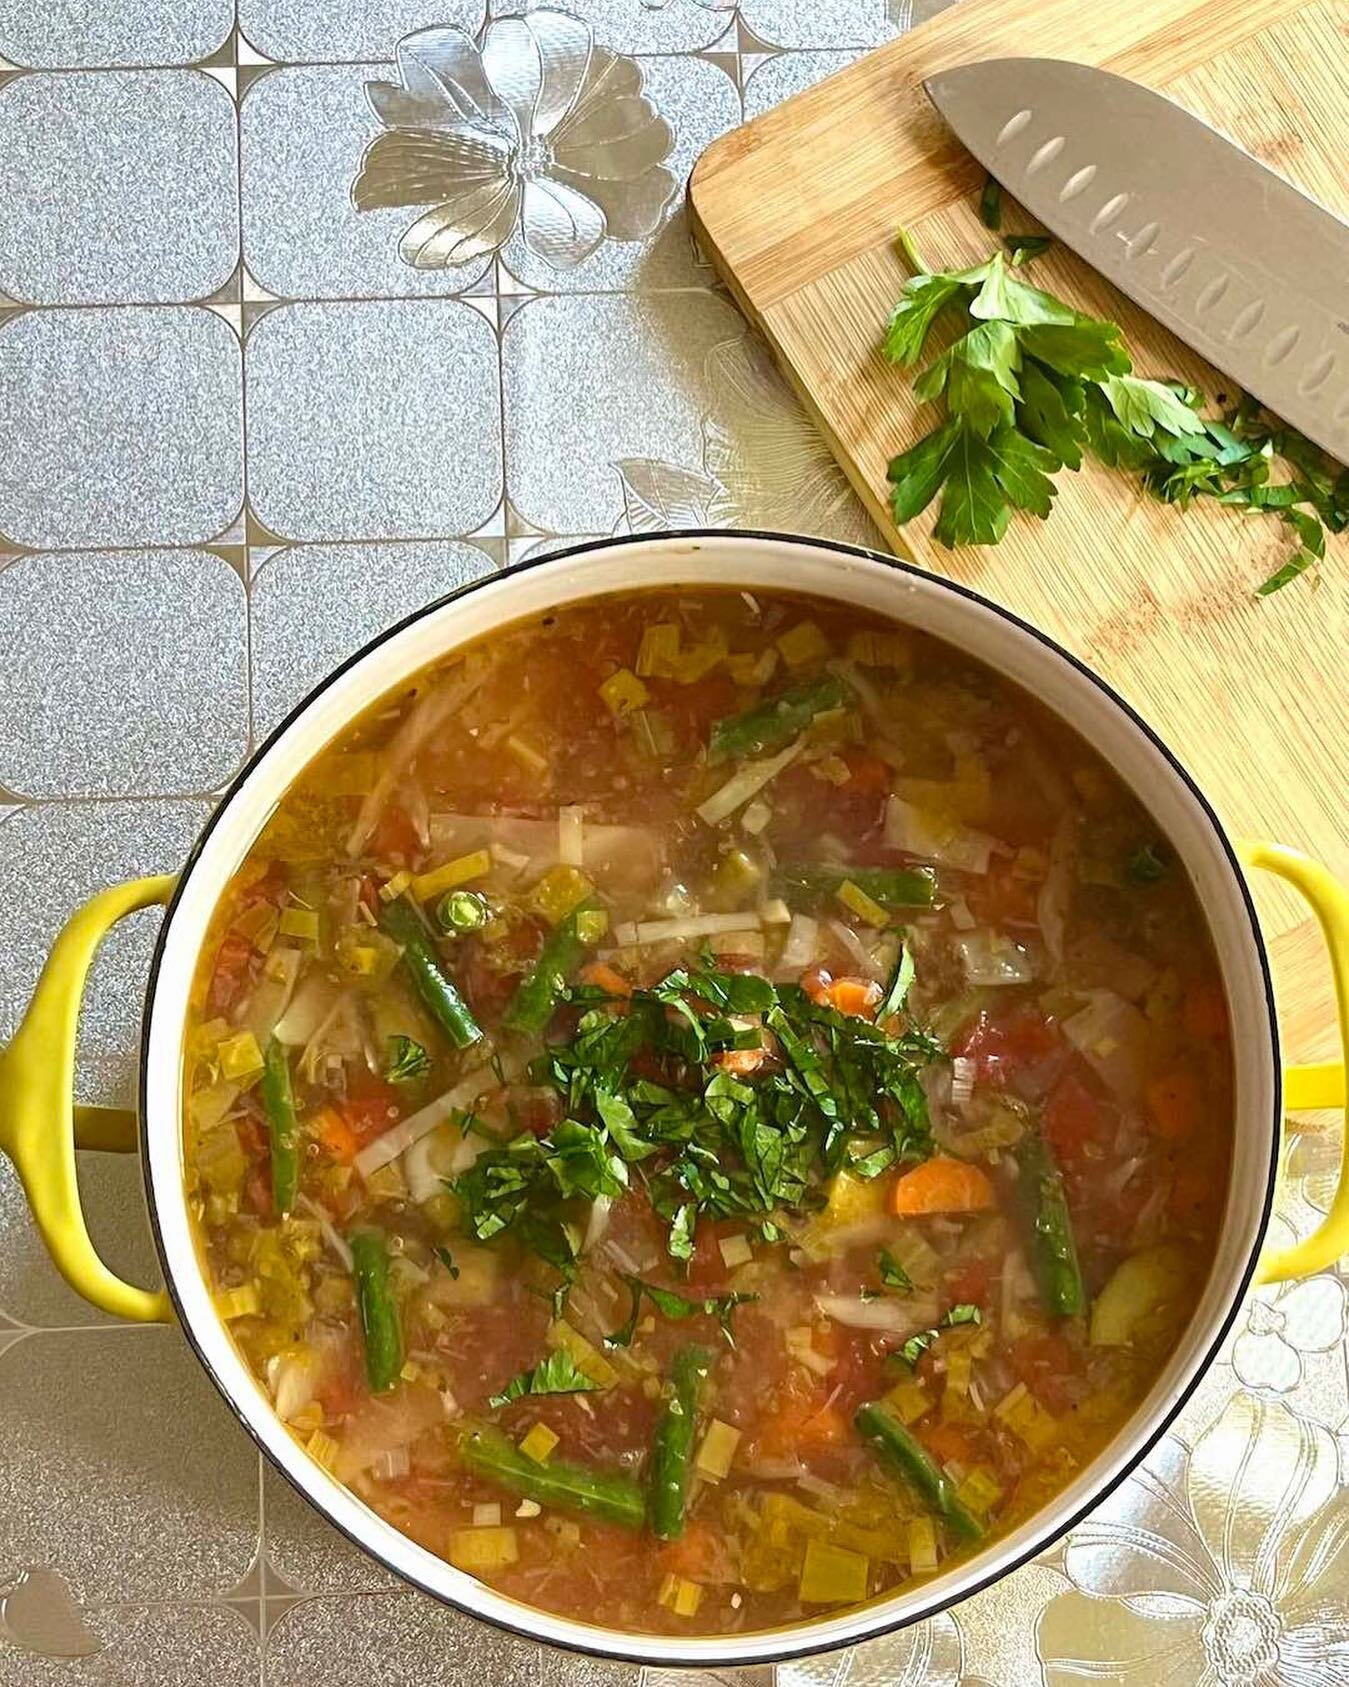 These days it&rsquo;s easier than ever to get takeout (especially when you live in a city), but there&rsquo;s a healing power to a home-cooked meal and the love and good wishes that come with it. This week in #taste_budding: Winter Vegetable Soup Wit